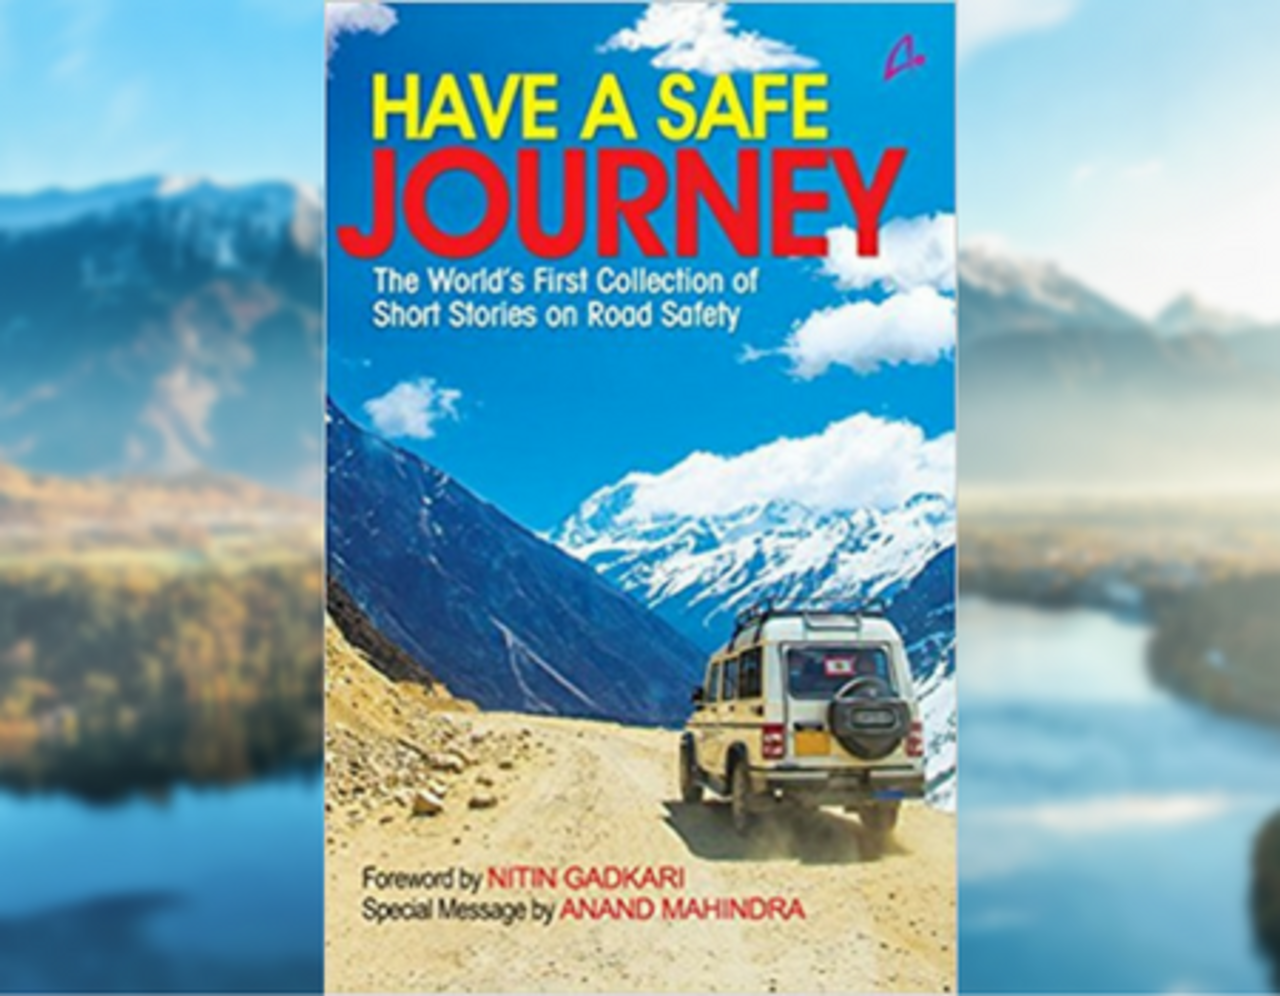 Micro Review: Have a Safe Journey is an eye-opening anthology on ...